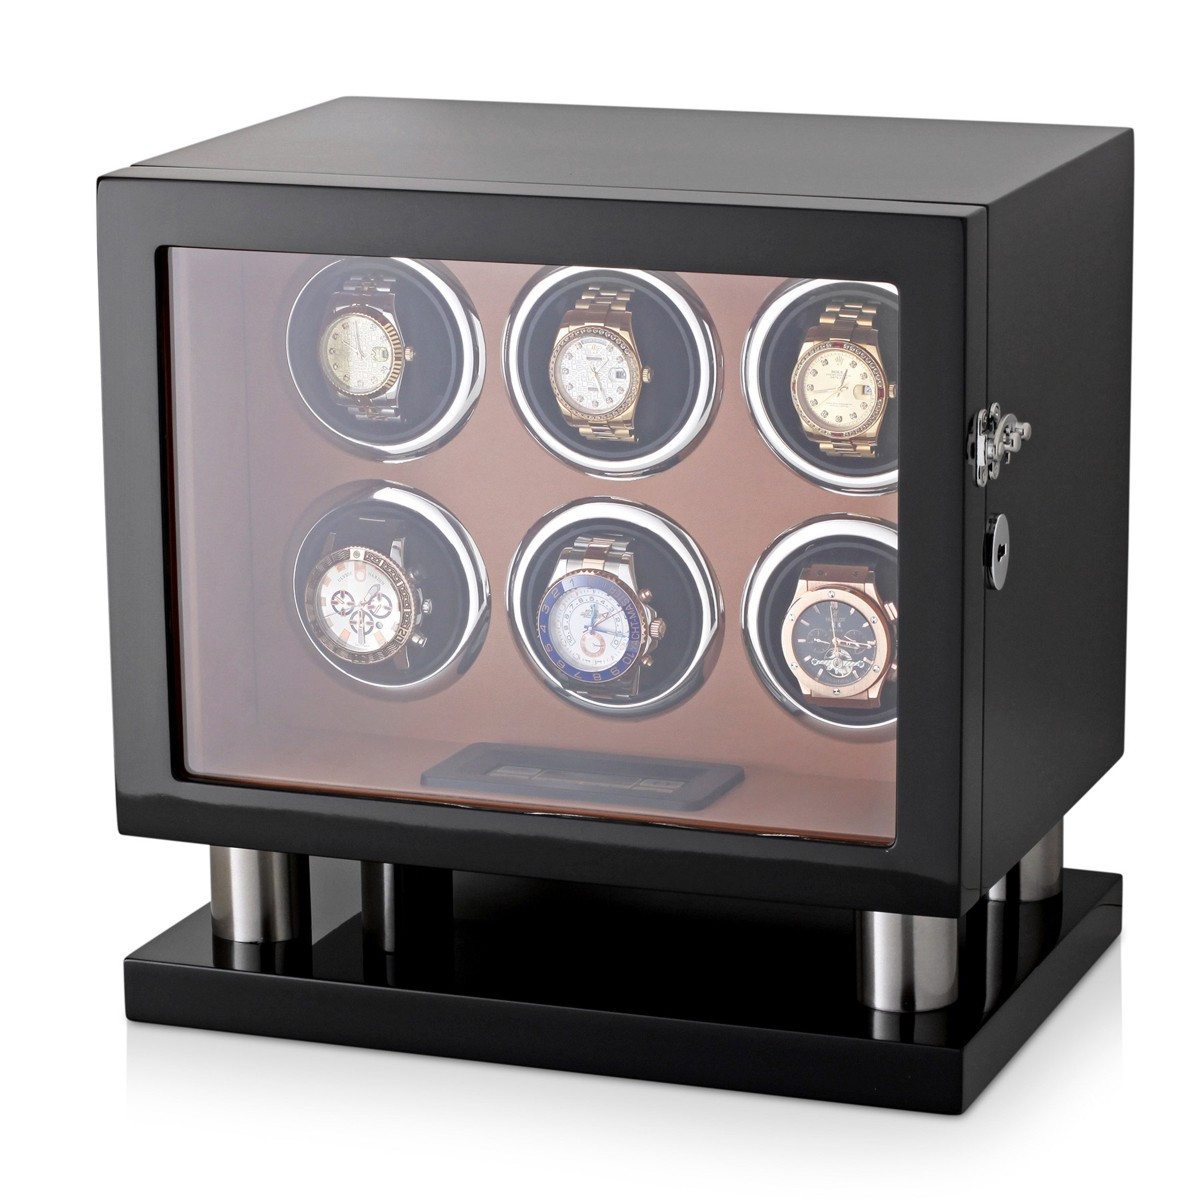 Watch Winder Box 8006-BBr-D for 6 Automatic Watches with Leather Lining